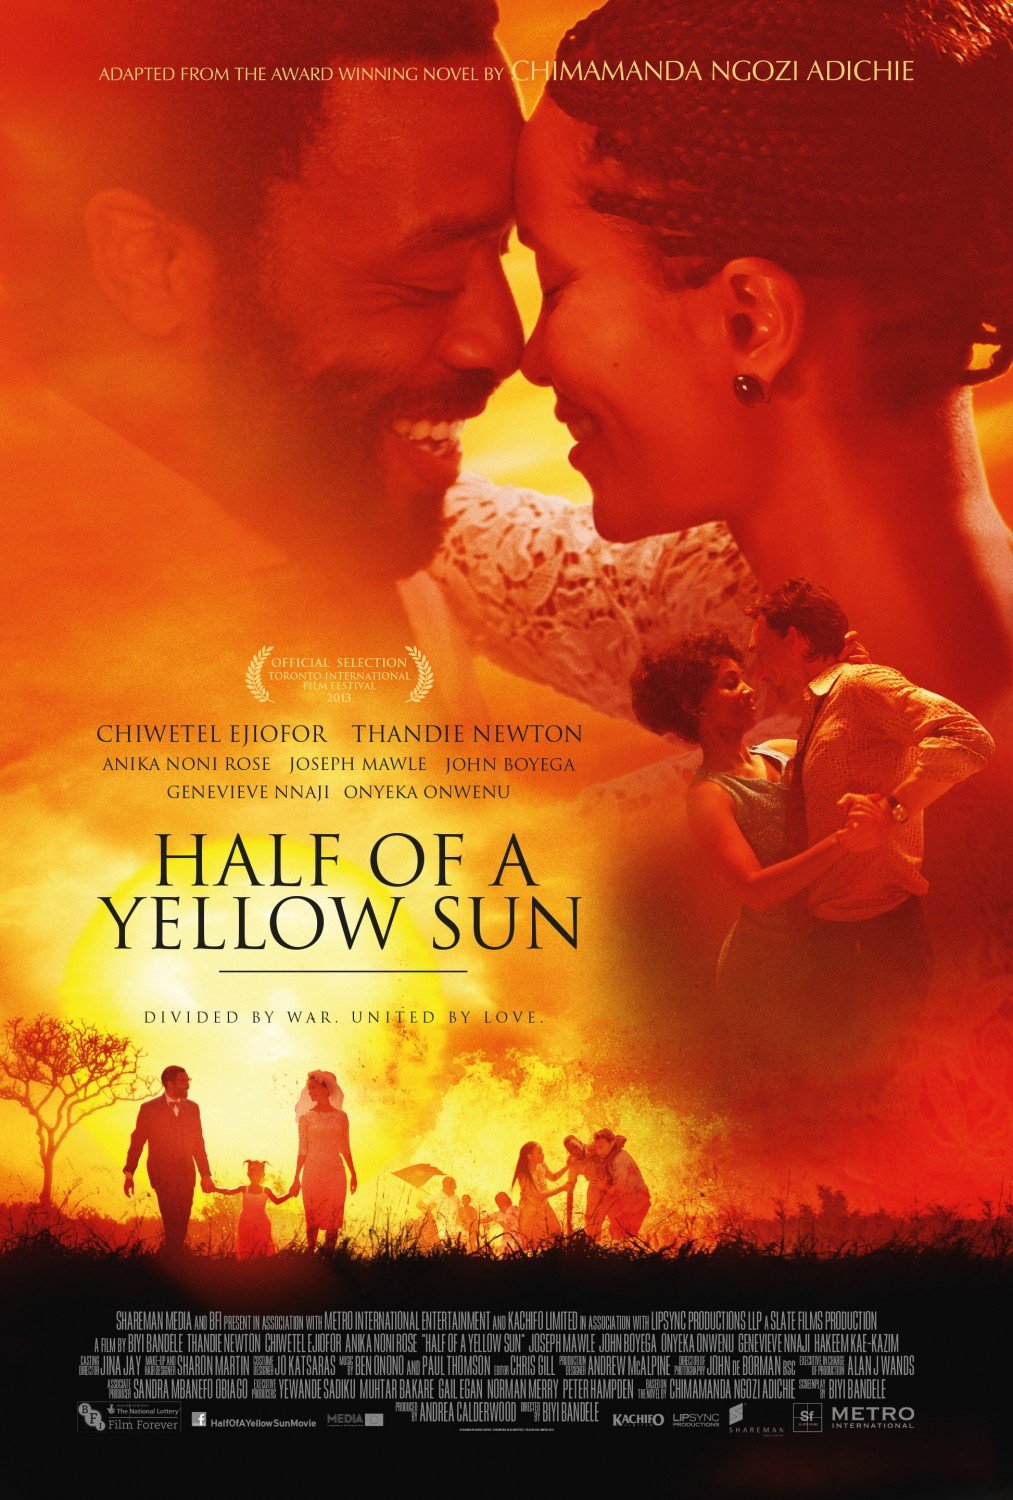 Poster of the movie Half of a Yellow Sun